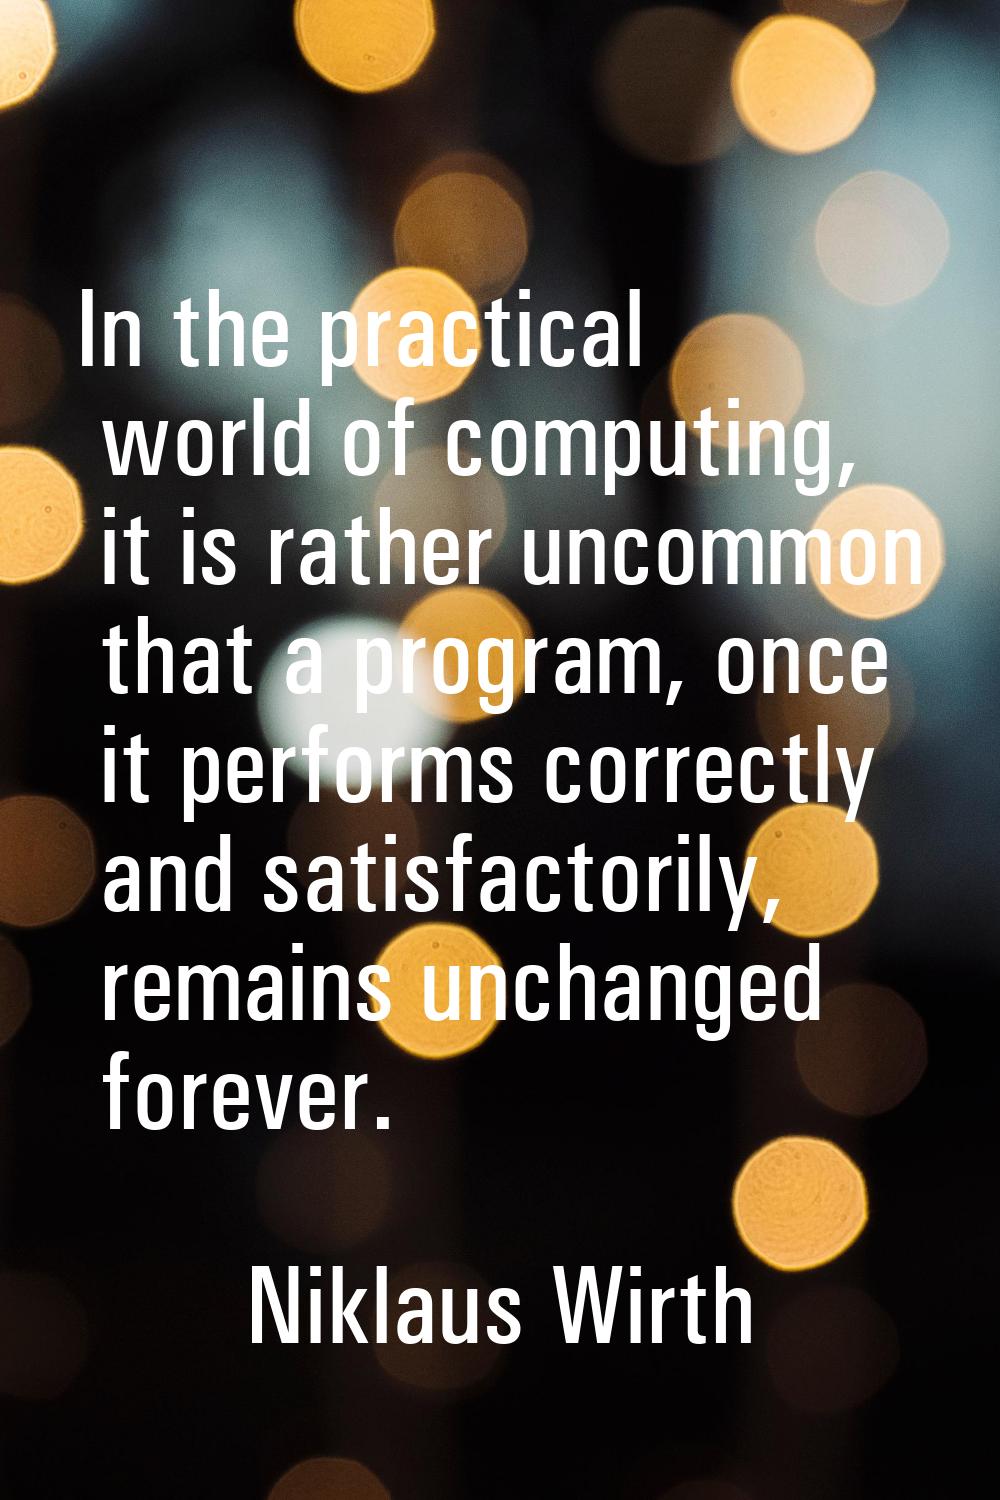 In the practical world of computing, it is rather uncommon that a program, once it performs correct